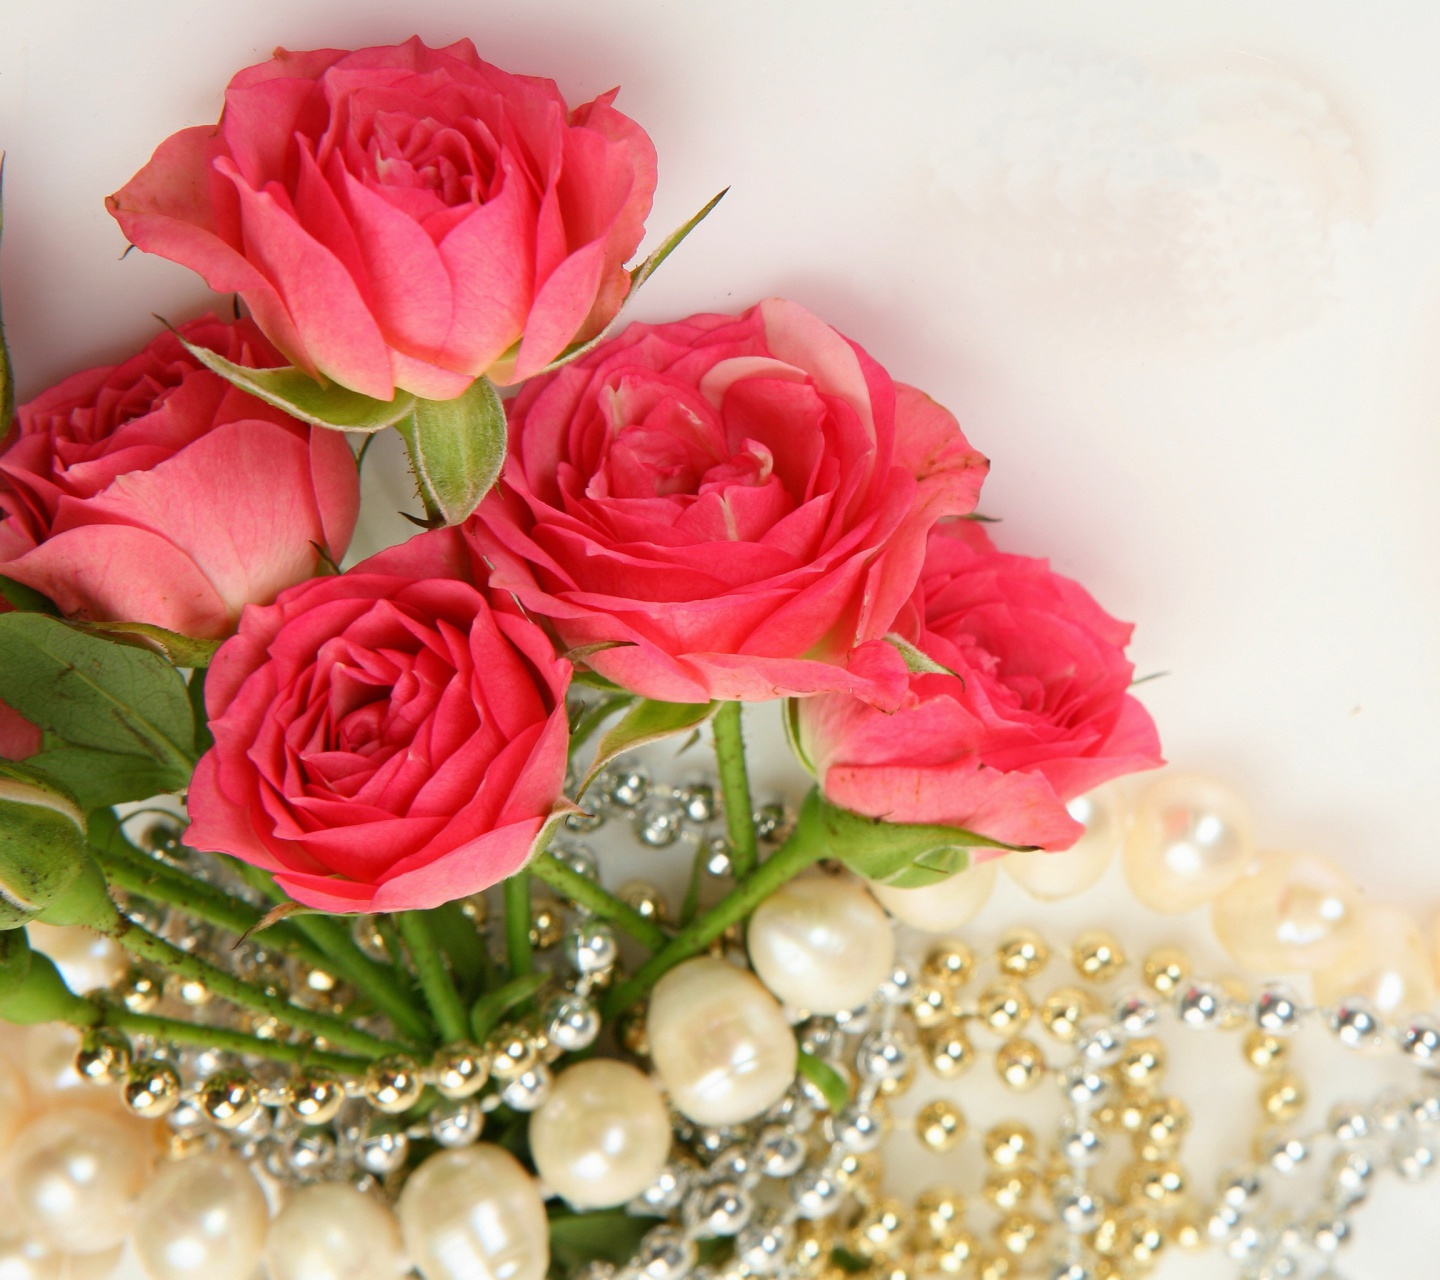 Das Necklace and Roses Bouquet Wallpaper 1440x1280